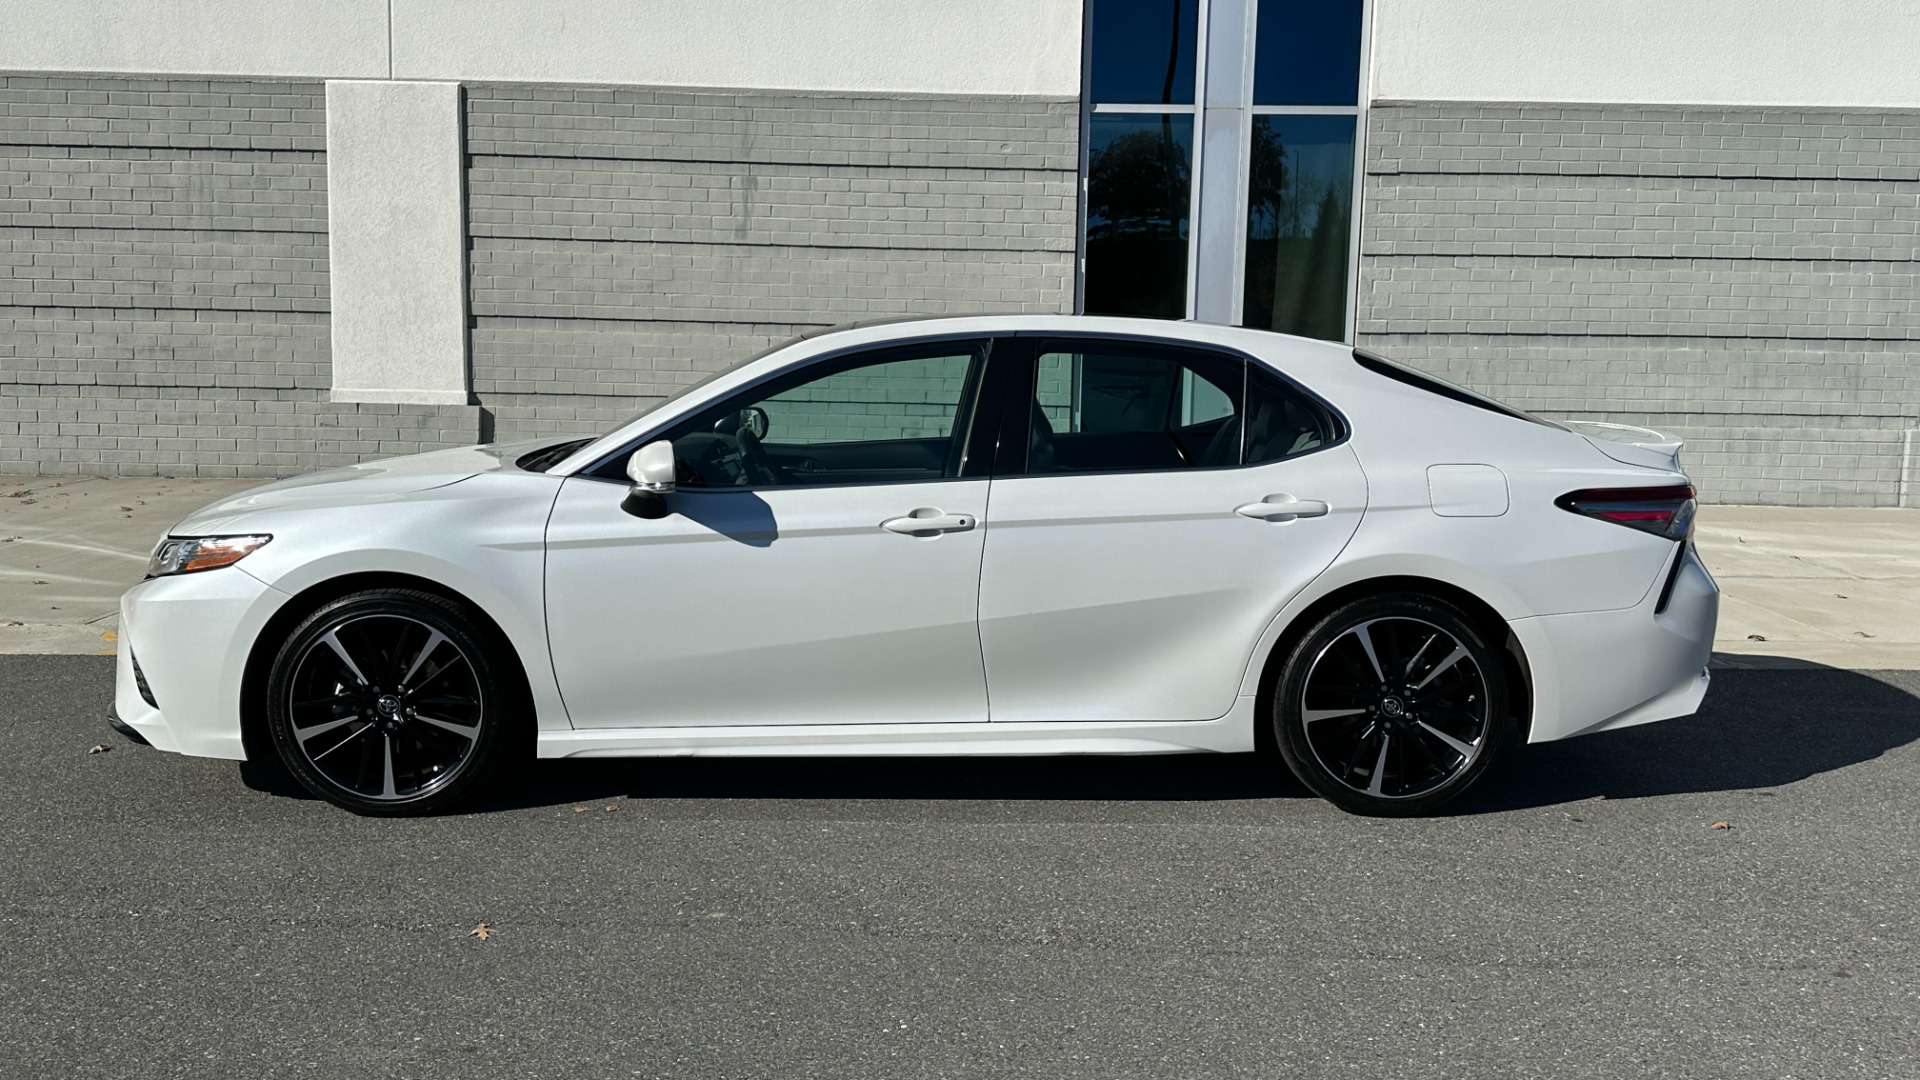 Used 2018 Toyota Camry XSE / PANORAMIC ROOF / ENTUNE / HEATED SEATS / BACKUP CAMERA for sale Sold at Formula Imports in Charlotte NC 28227 3